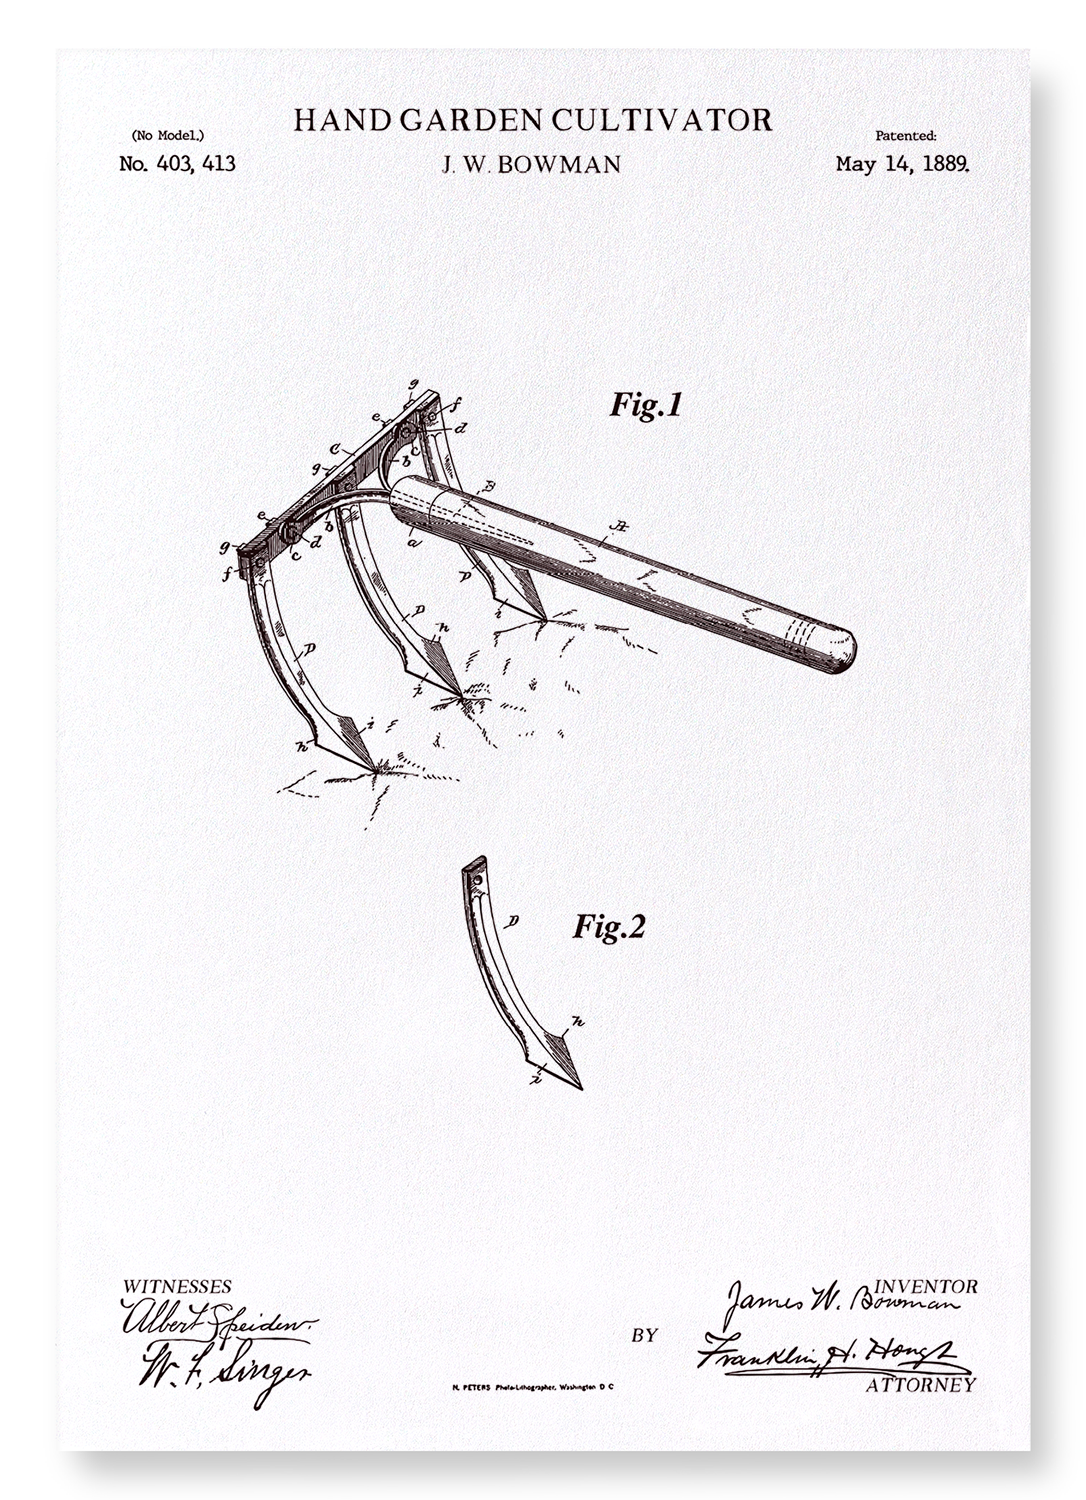 PATENT OF HAND GARDEN CULTIVATOR (1889)